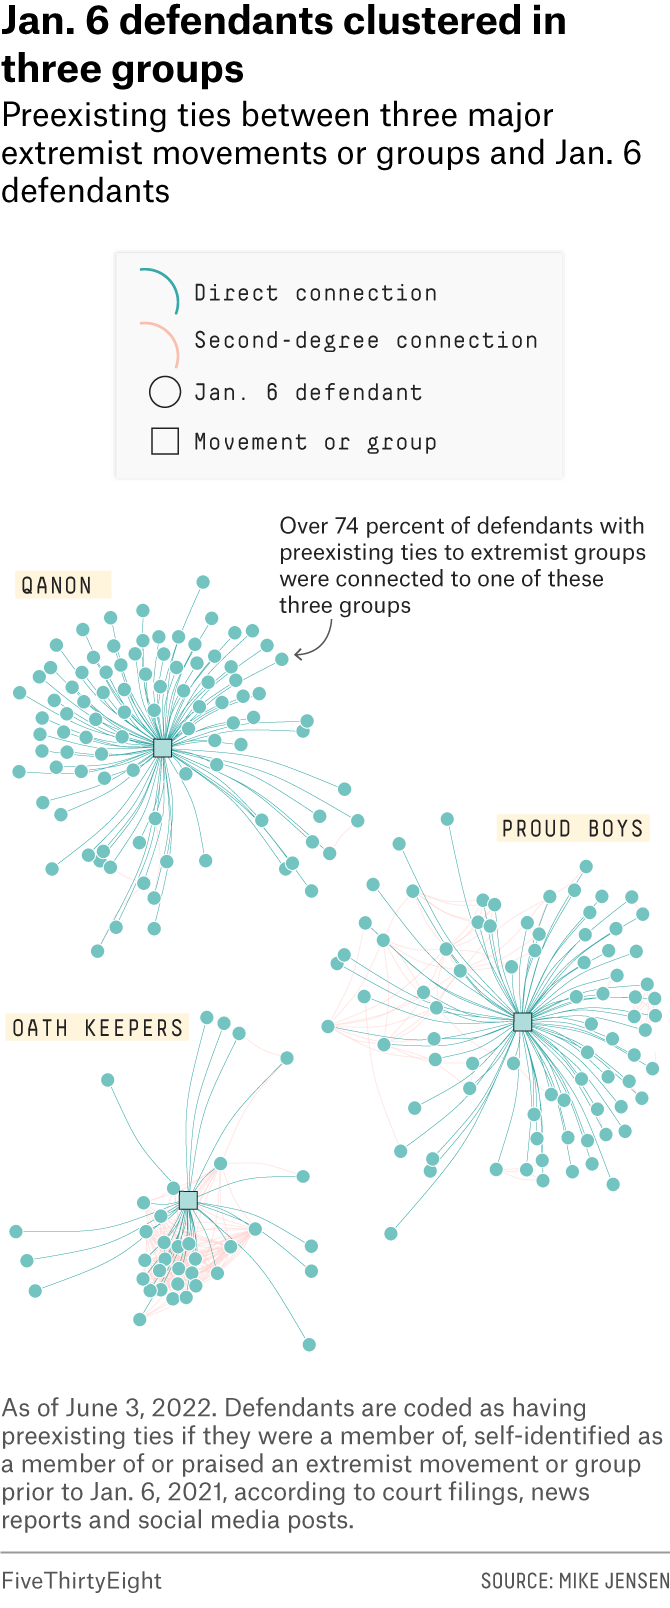 Three clusters show the connections between extremist groups involved in the Jan. 6 insurrection. QAnon, the Oath Keepers and the Proud Boys are the three main groups represented here. 